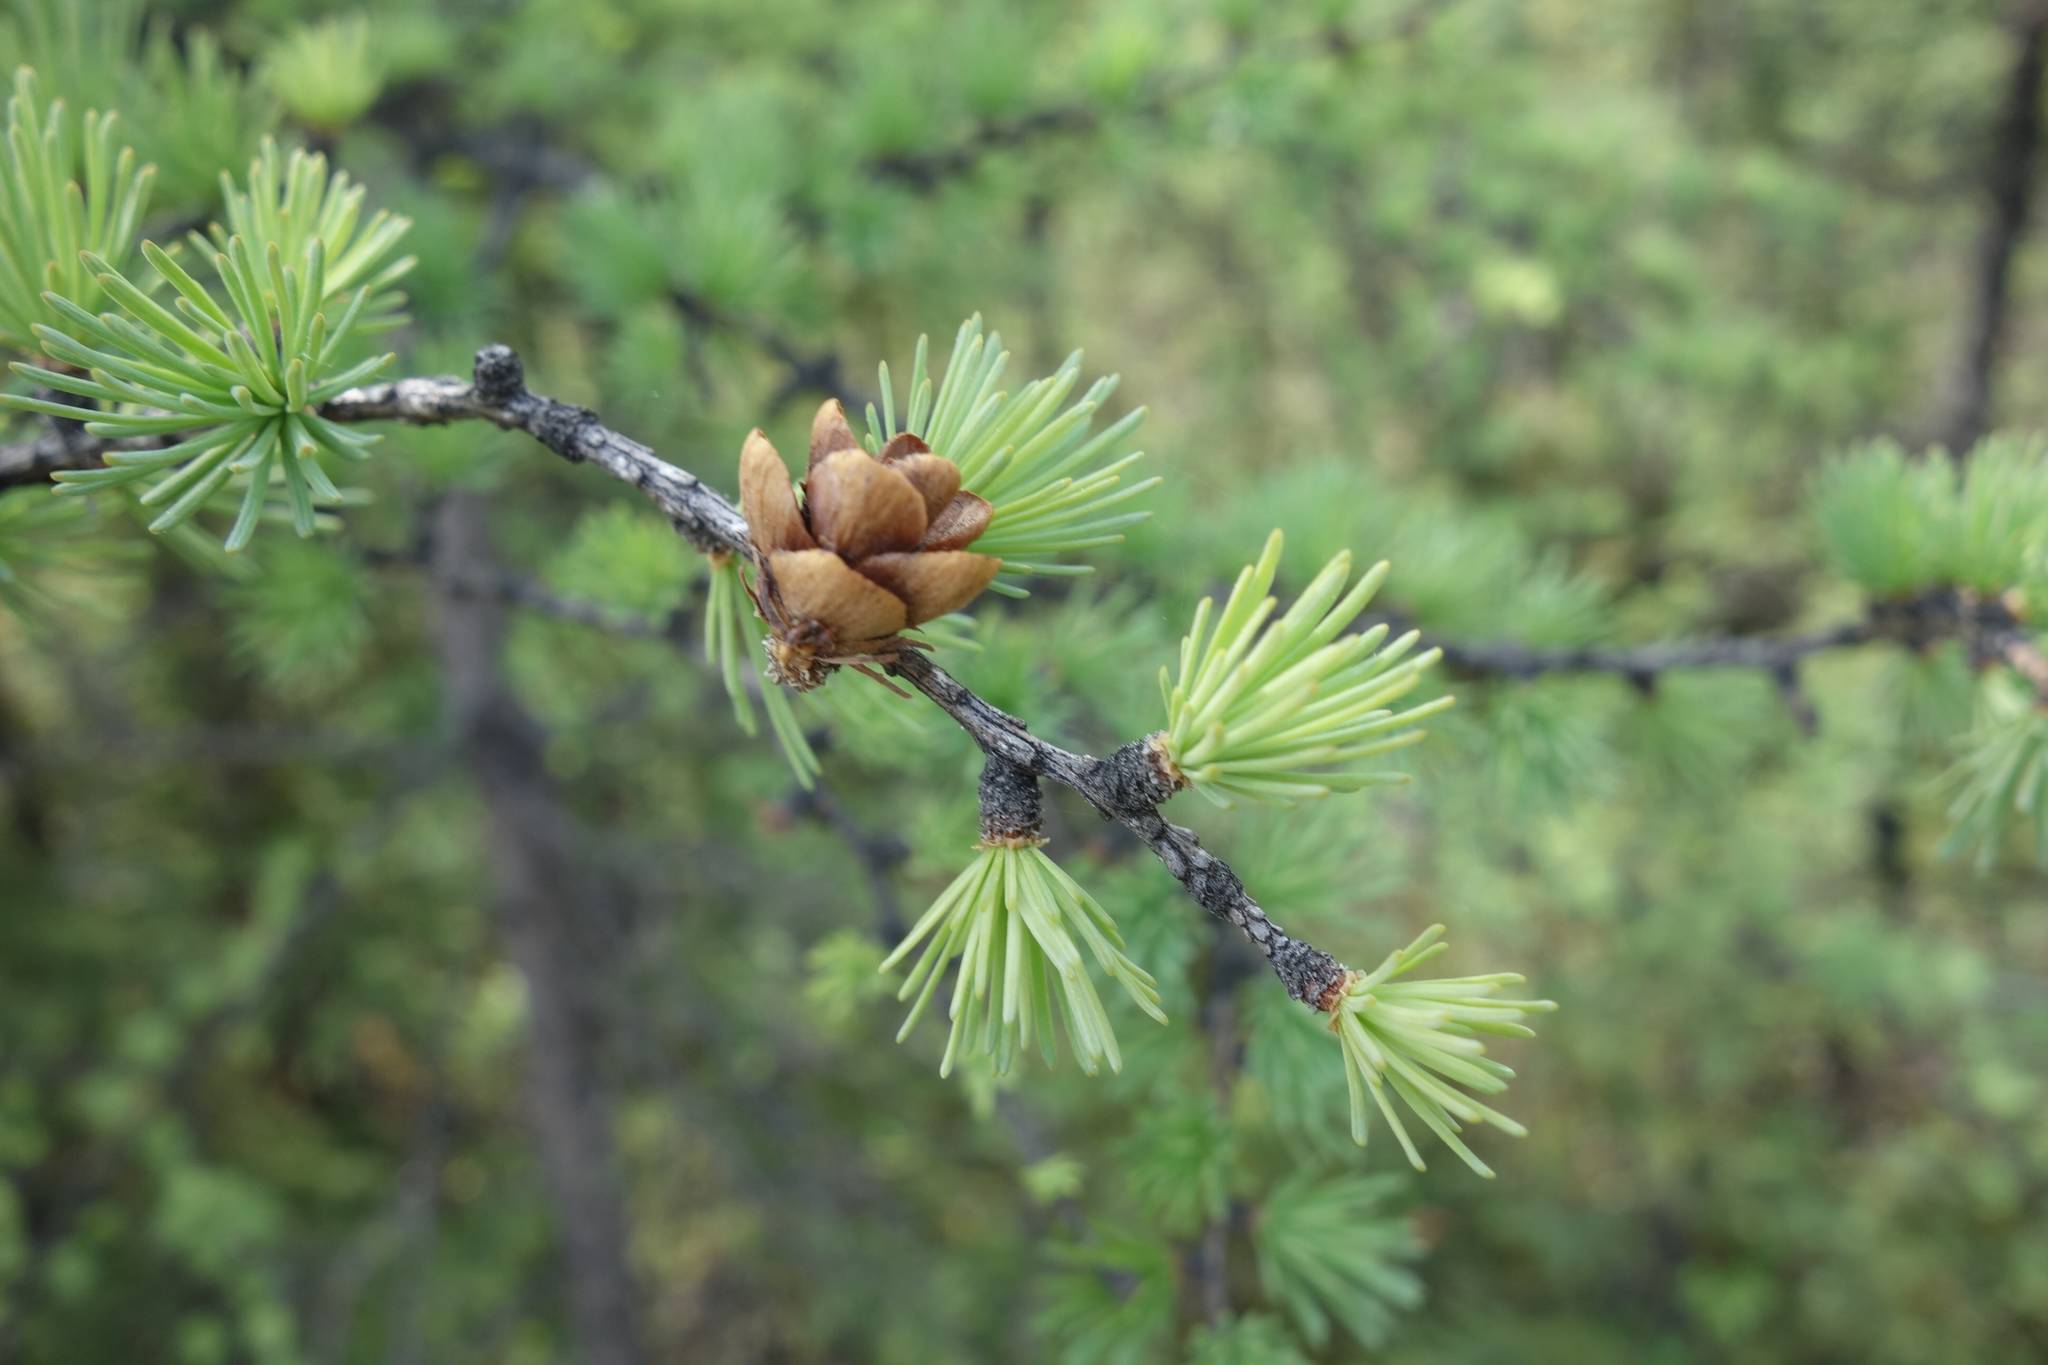 Tamaracks have recovered from a larch sawfly invasion of the 1990s. (Photo by Ned Rozell)